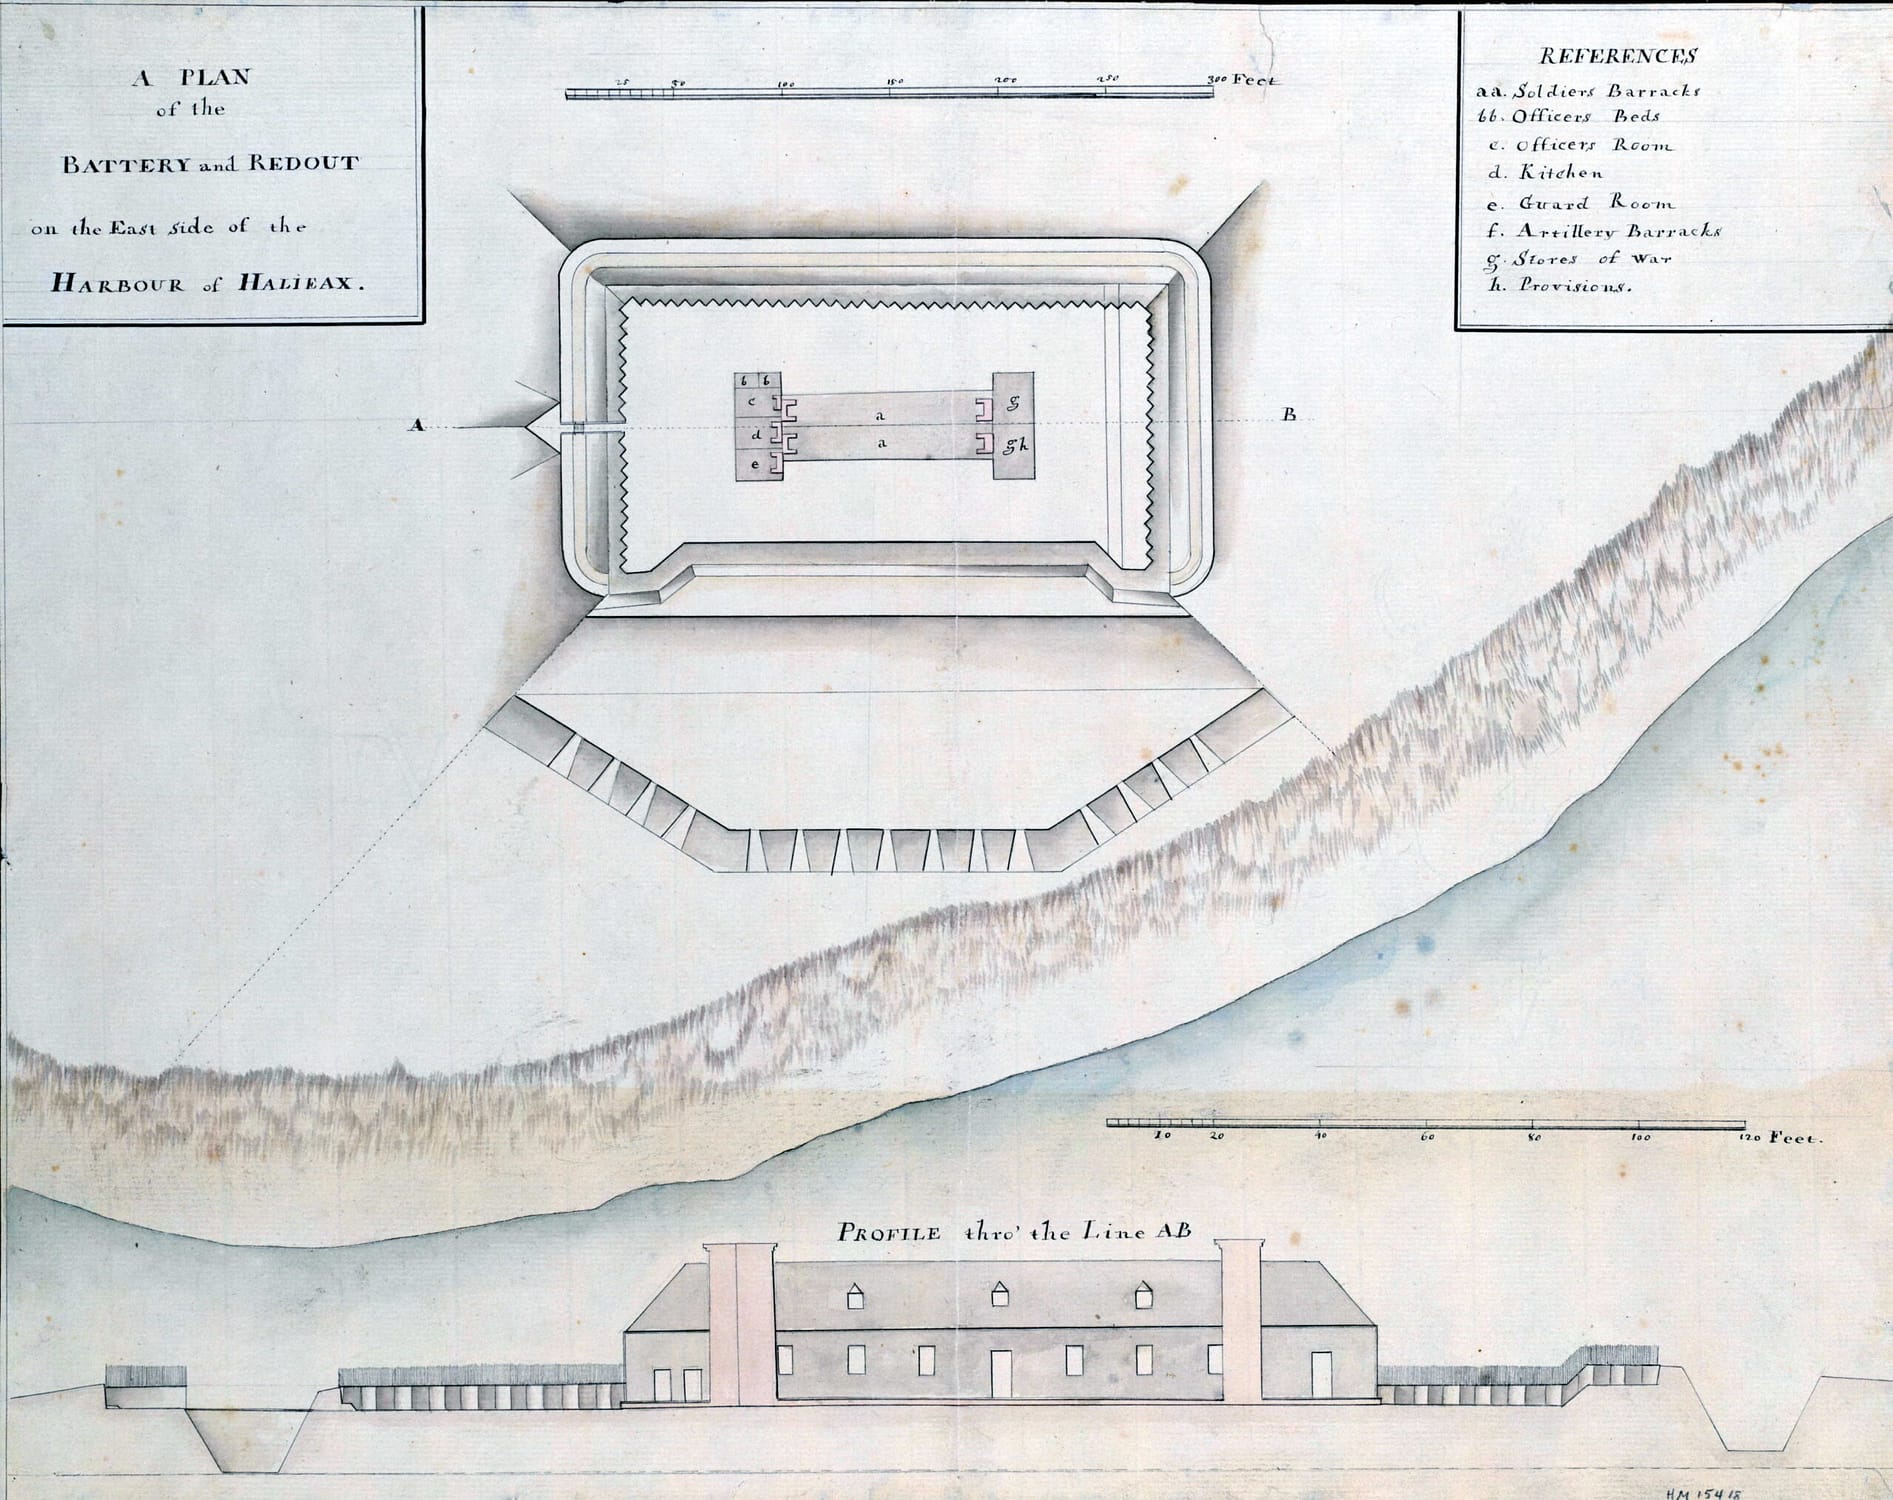 A plan of the battery and redout on the east side of the harbour of Halifax (Dartmouth)